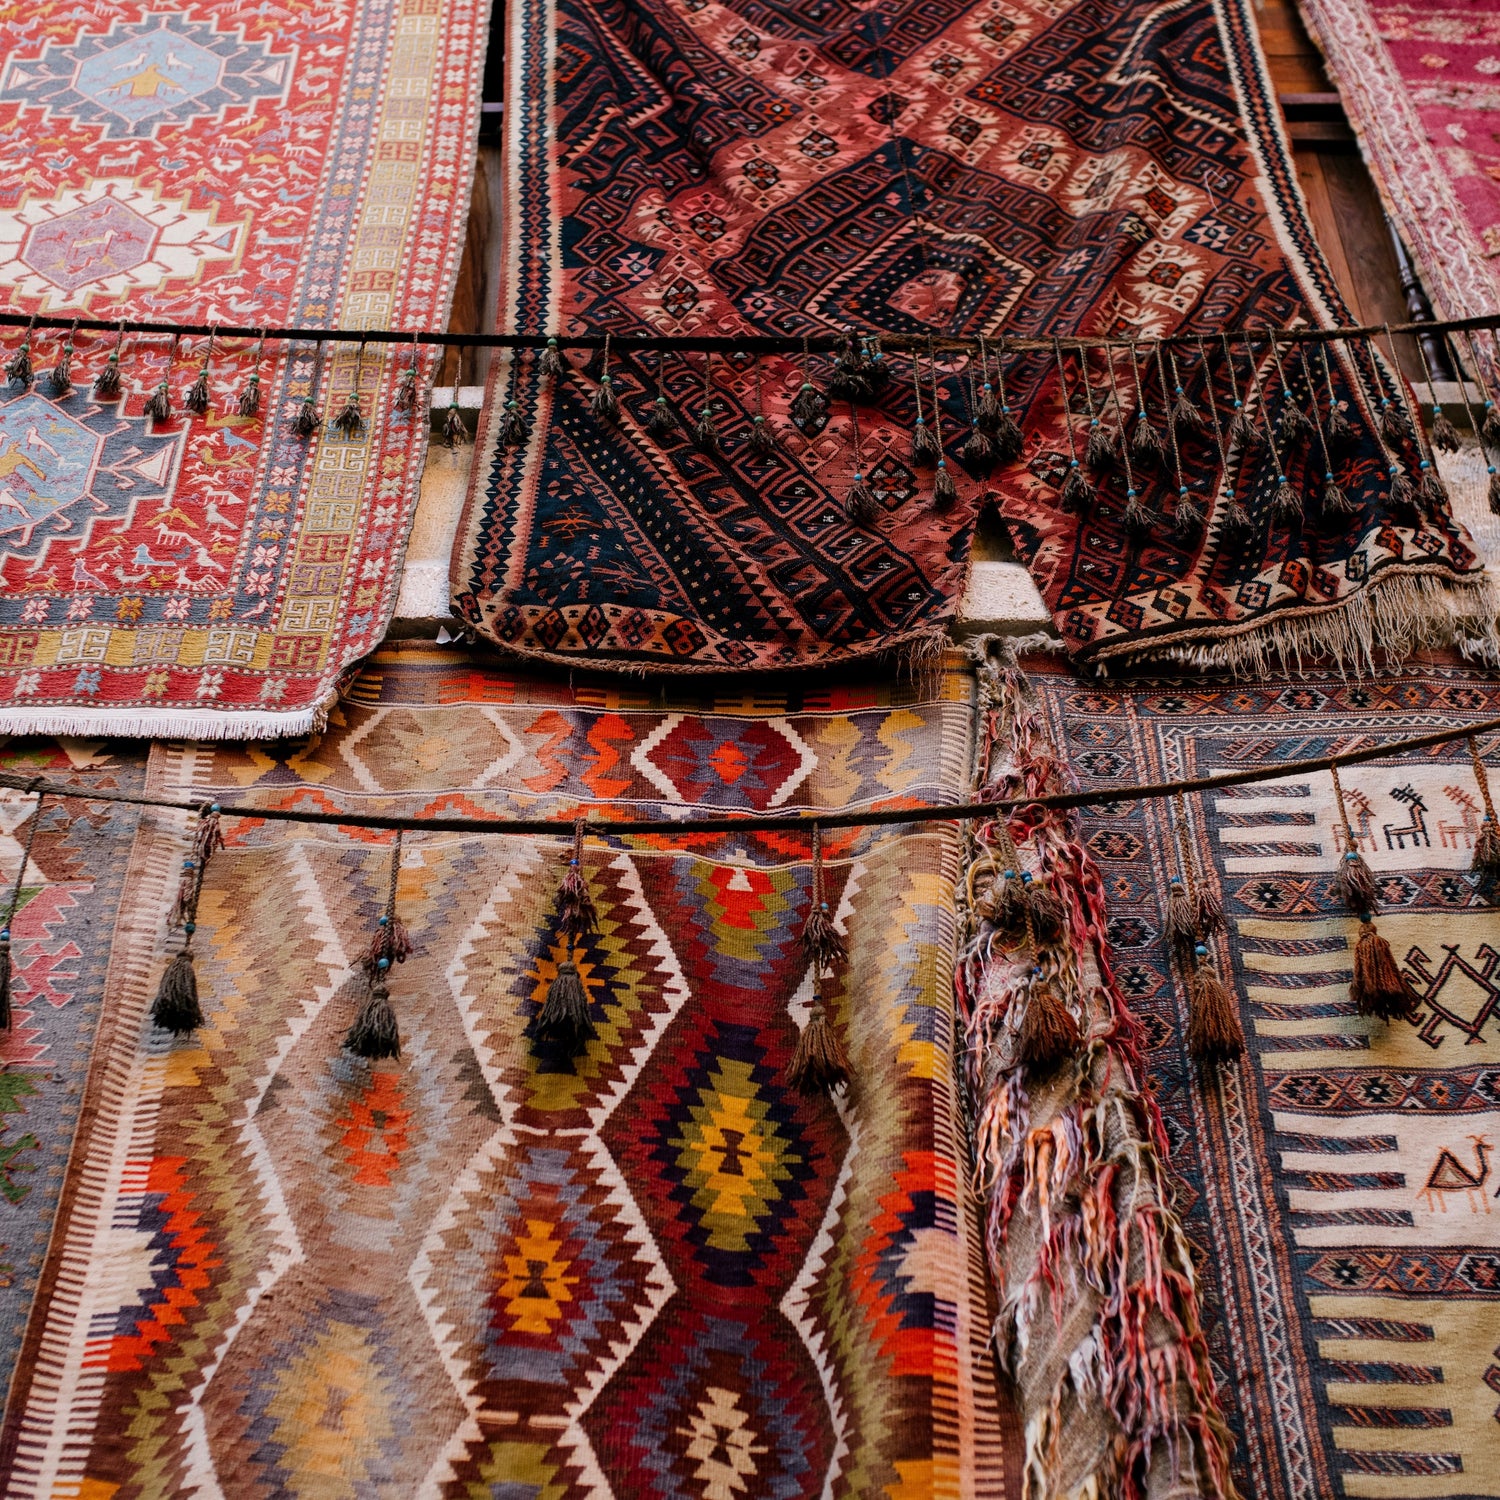 Vintage Turkish Rugs To add Warmth and Comfort To Your Home